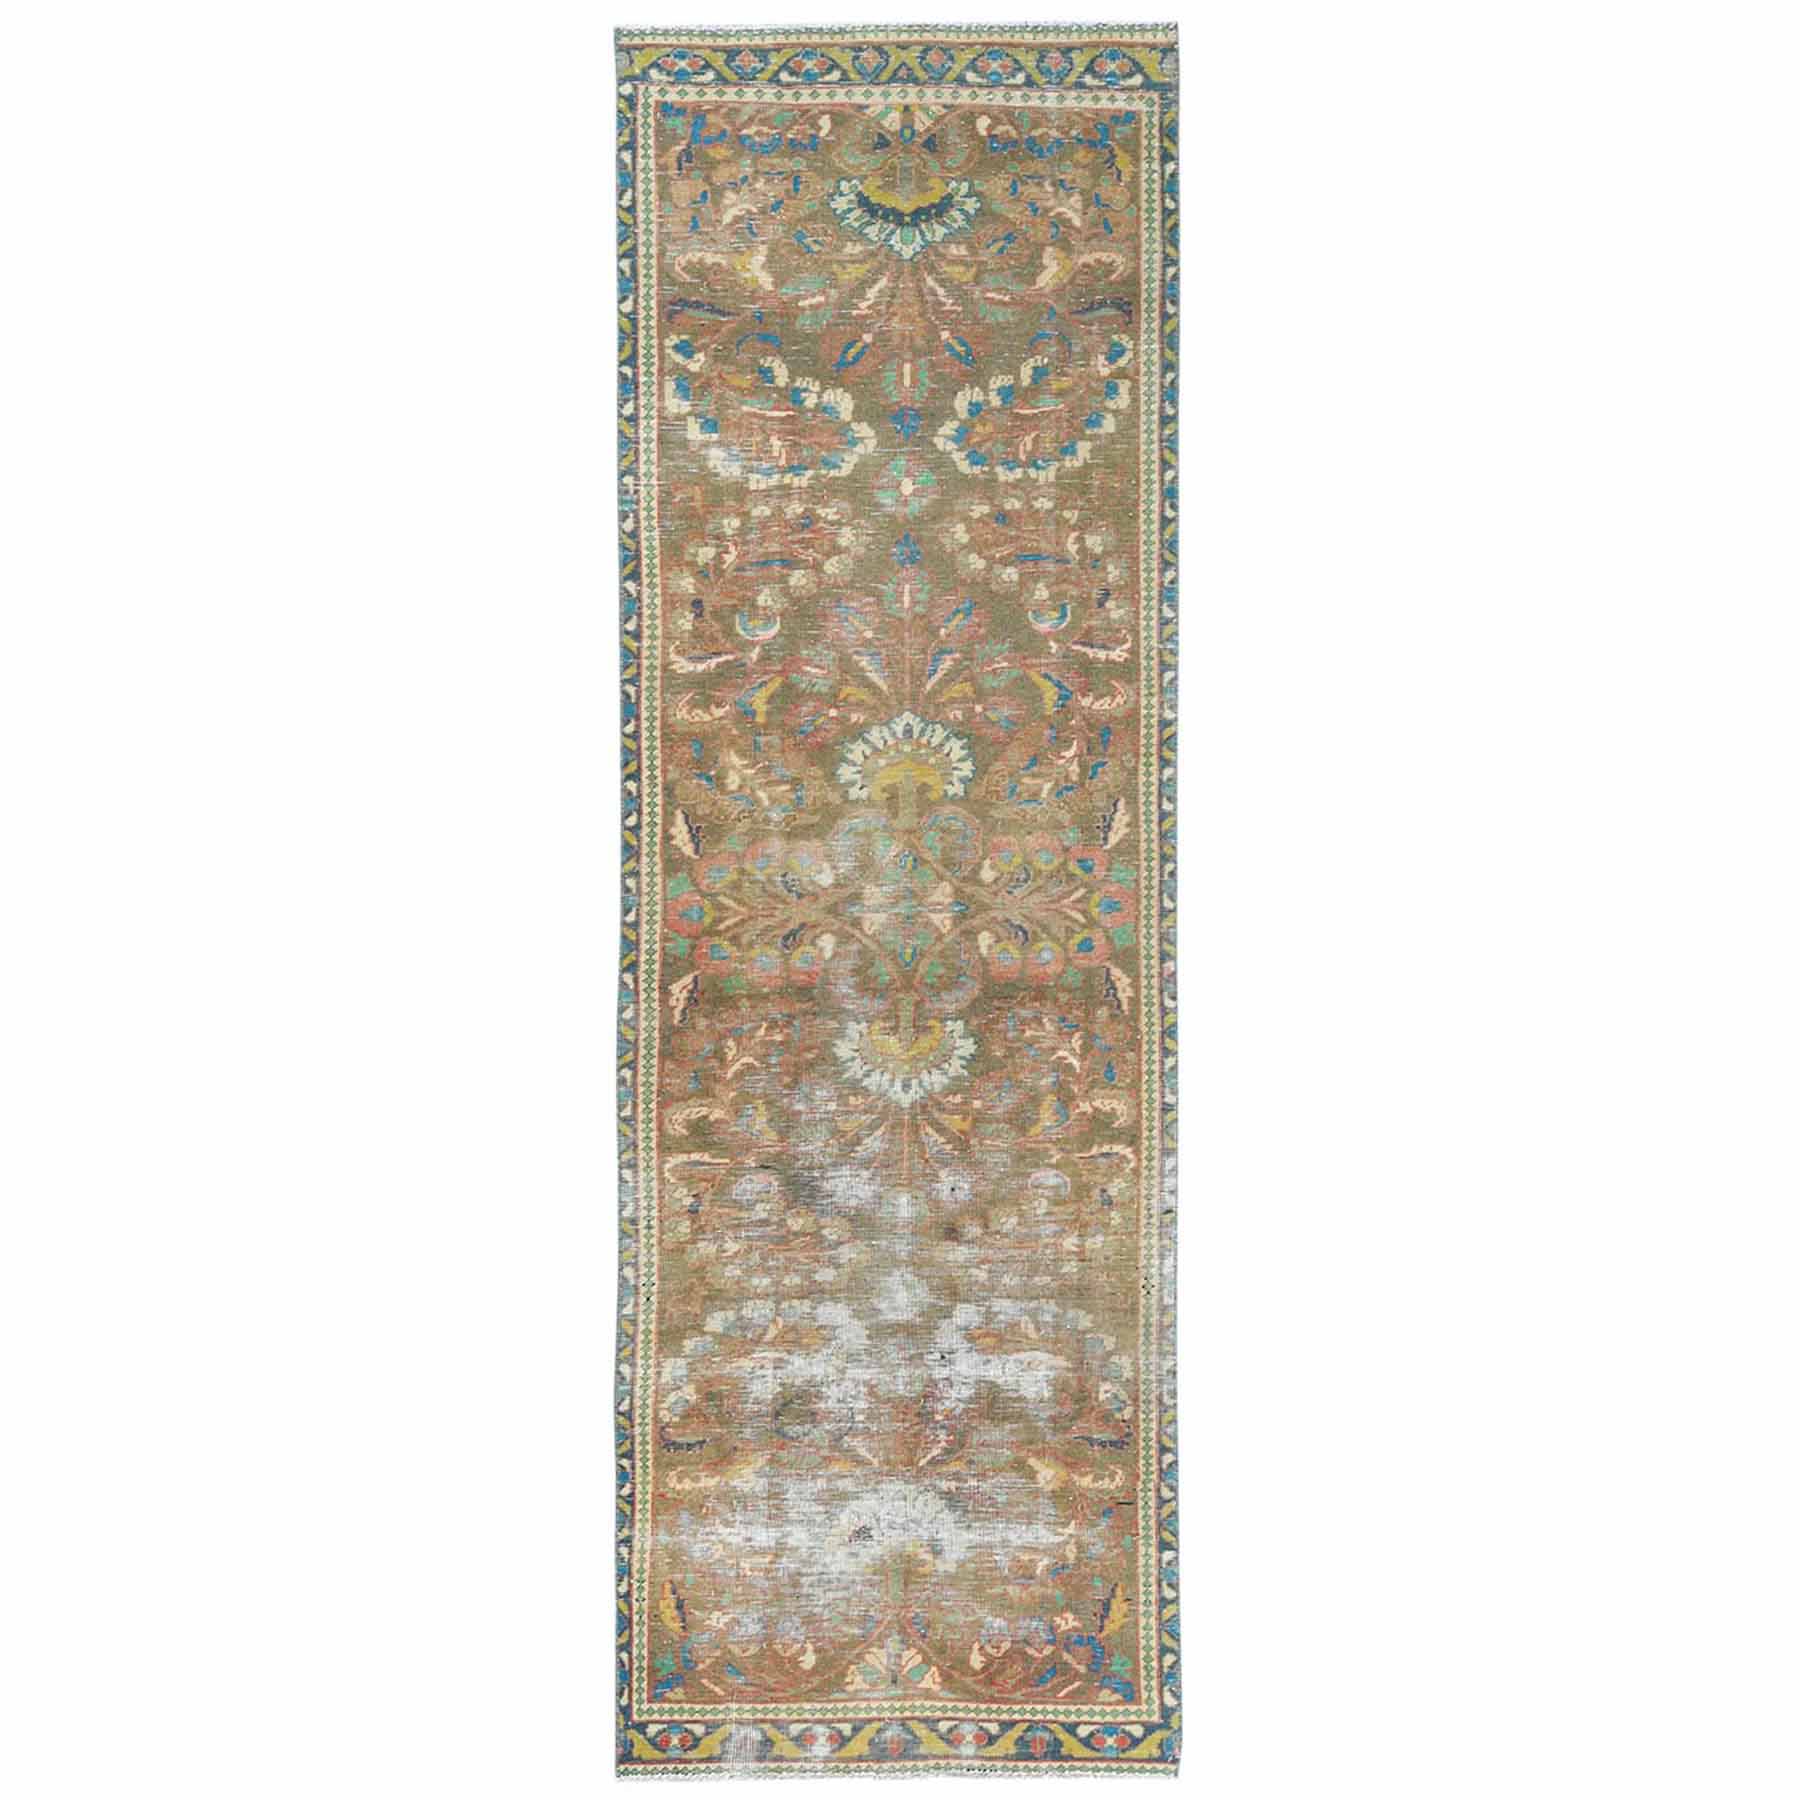 Overdyed-Vintage-Hand-Knotted-Rug-409480